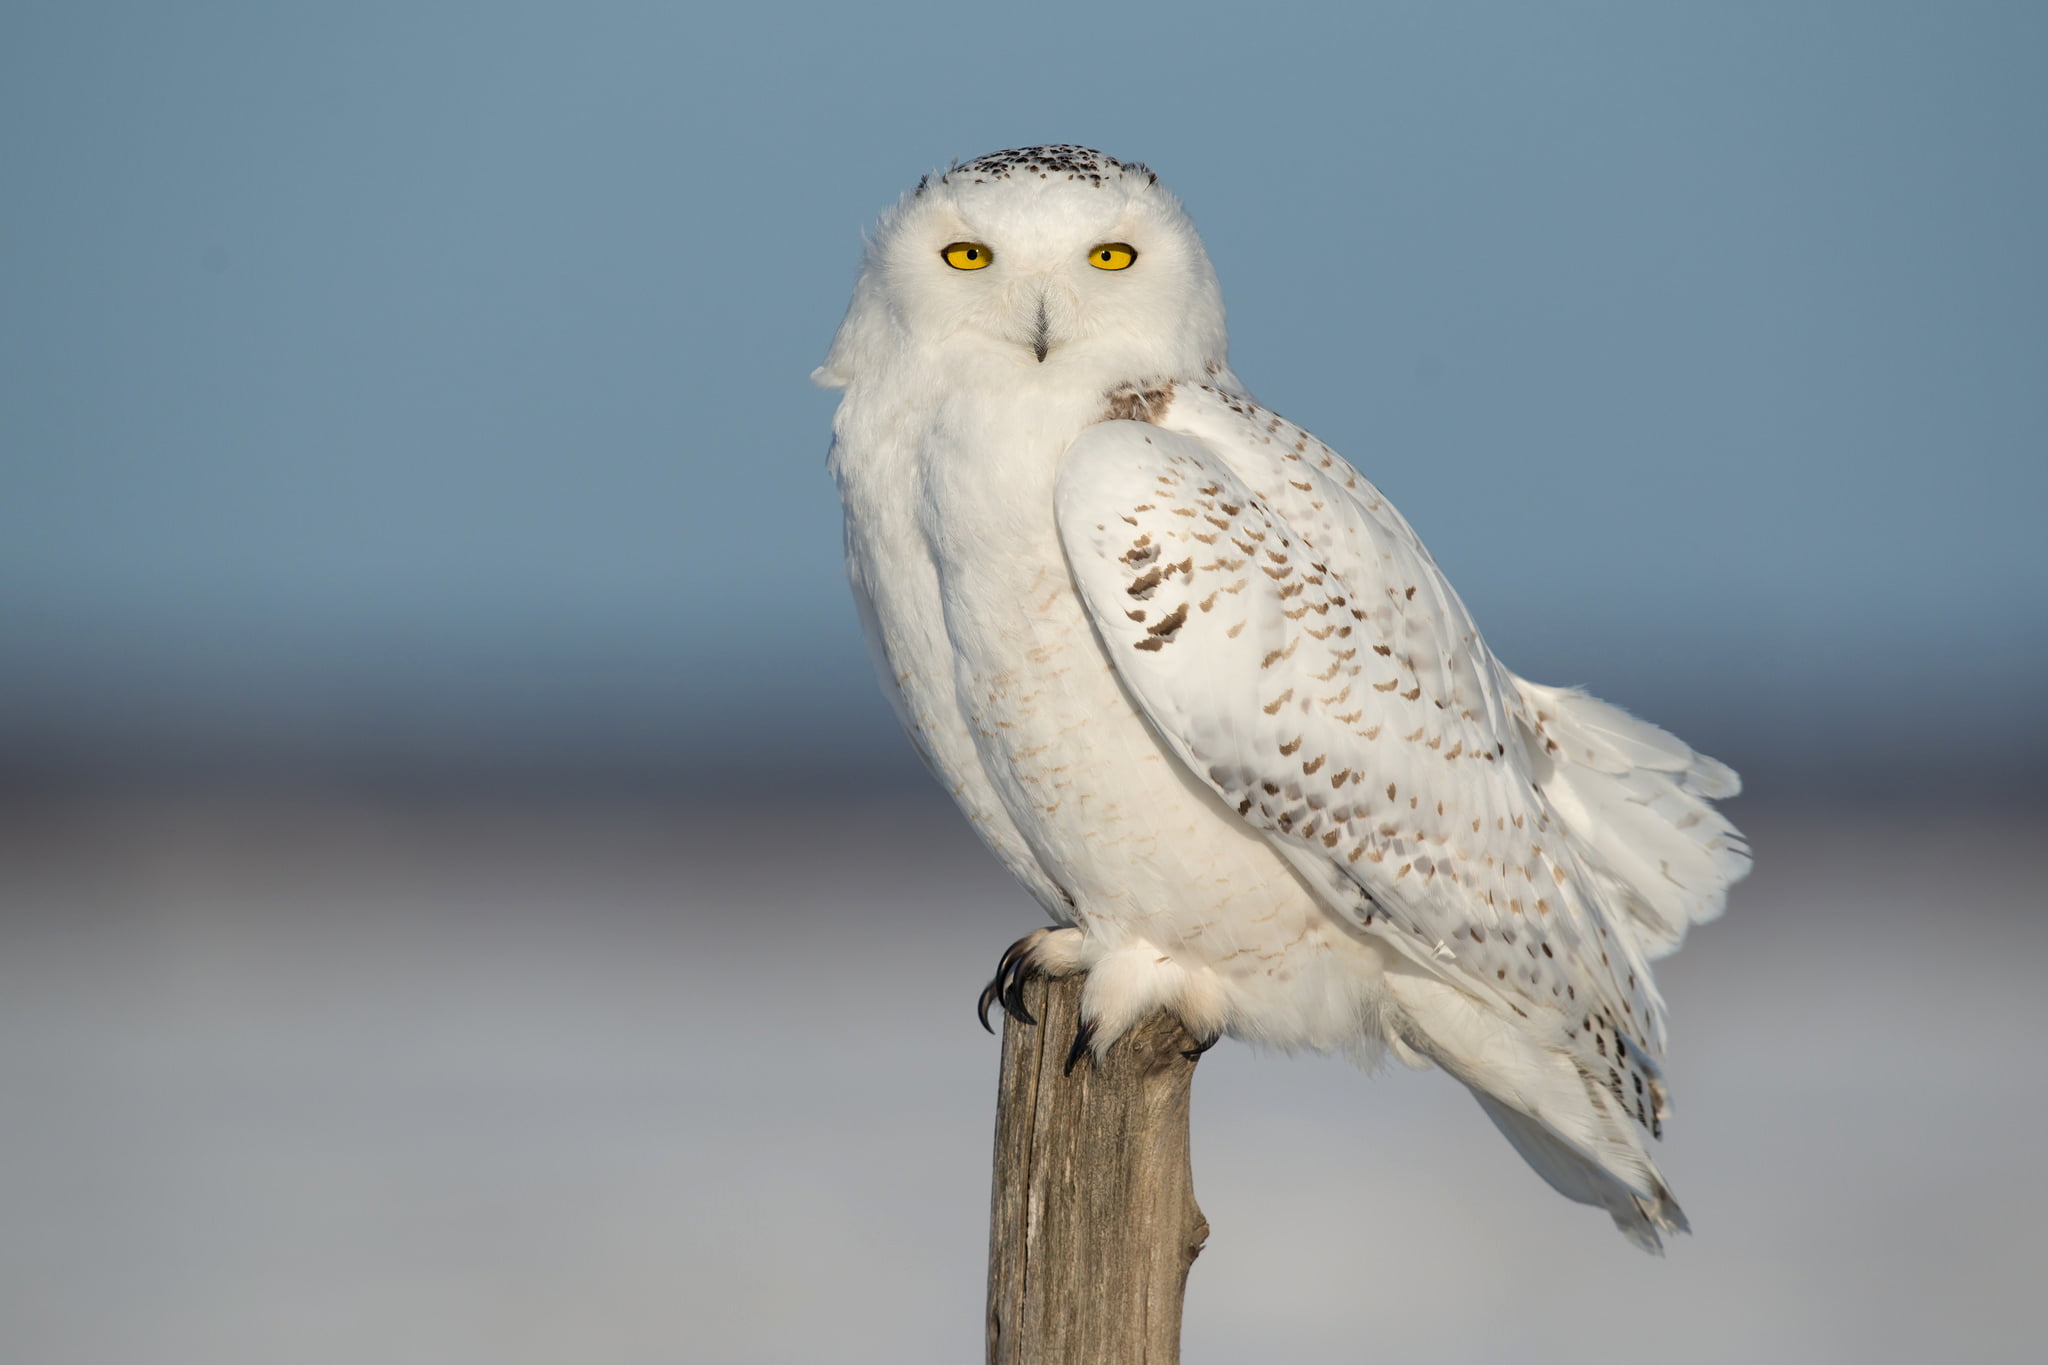 white and brown owl, the sky, nature, bird, feathers, snowy owl